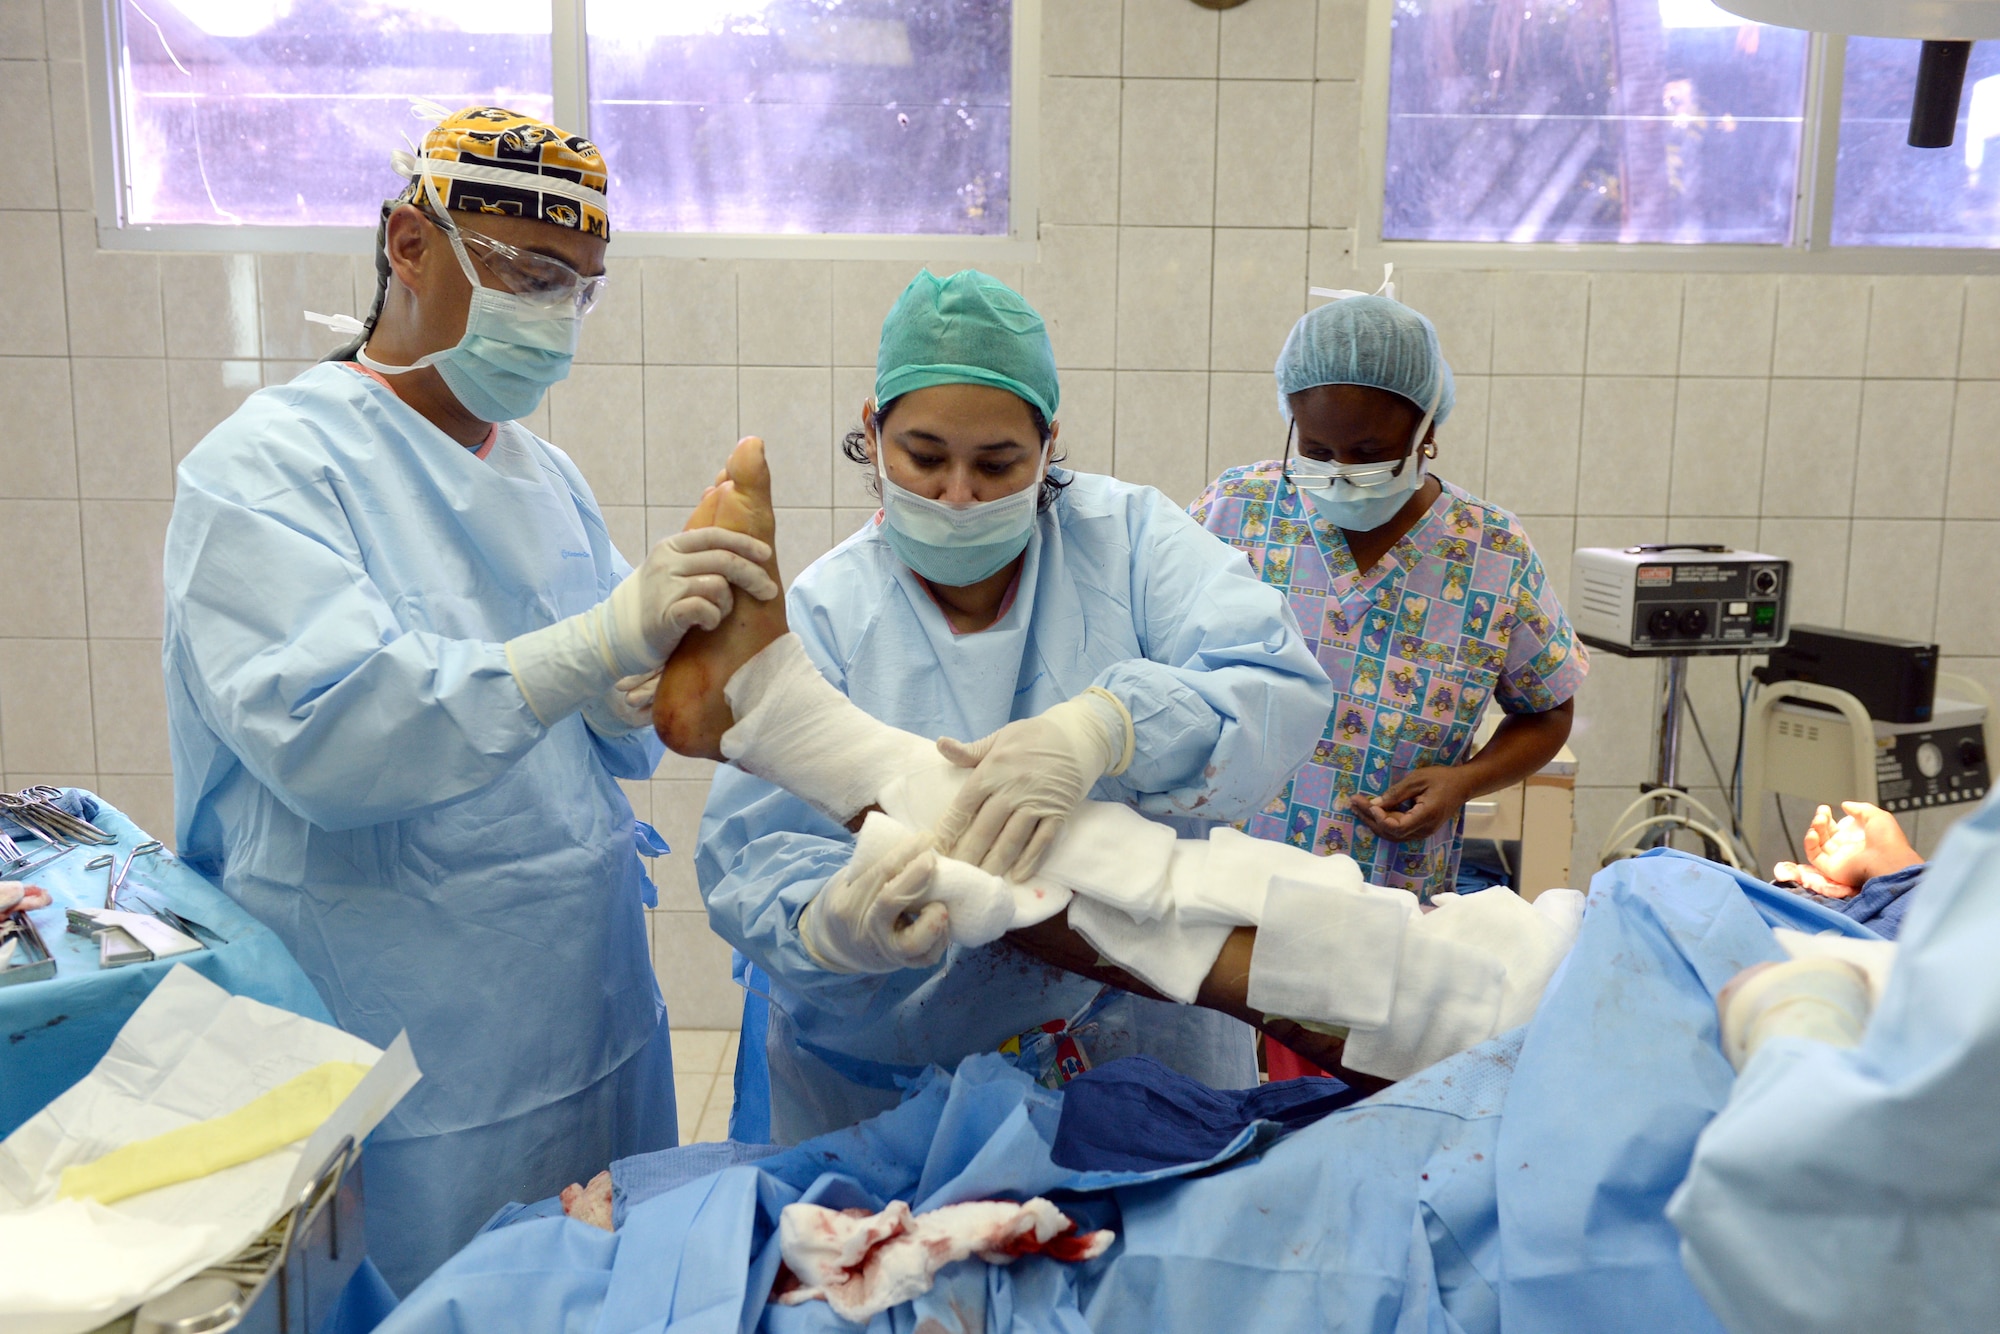 U.S. Air Force Maj. Chol Kim, 88th Aerospace Medical Squadron physician’s assistant, out Wright-Patterson Air Force Base, assists Dr. Ana Mejia, Dr. Salvador Paredes Hospital general surgeon, in the Dr. Salvador Paredes Hospital in Trujillo, Honduras, August 10, 2015, as she wraps the injured leg of a soldier from the Honduran Army’s 15th Battalion. The Honduran solider was one of 13 involved in an explosion at his base. Chol is in Honduras as part of the New Horizons Honduras 2015 training exercise. 

New Horizons was launched in the 1980s and is an annual joint humanitarian assistance exercise that U.S. Southern Command conducts with a partner nation in Central America, South America or the Caribbean. The exercise improves joint training readiness of U.S. and partner nation civil engineers, medical professionals and support personnel through humanitarian assistance activities.

(U.S. Air Force photo by Capt. David J. Murphy/Released)